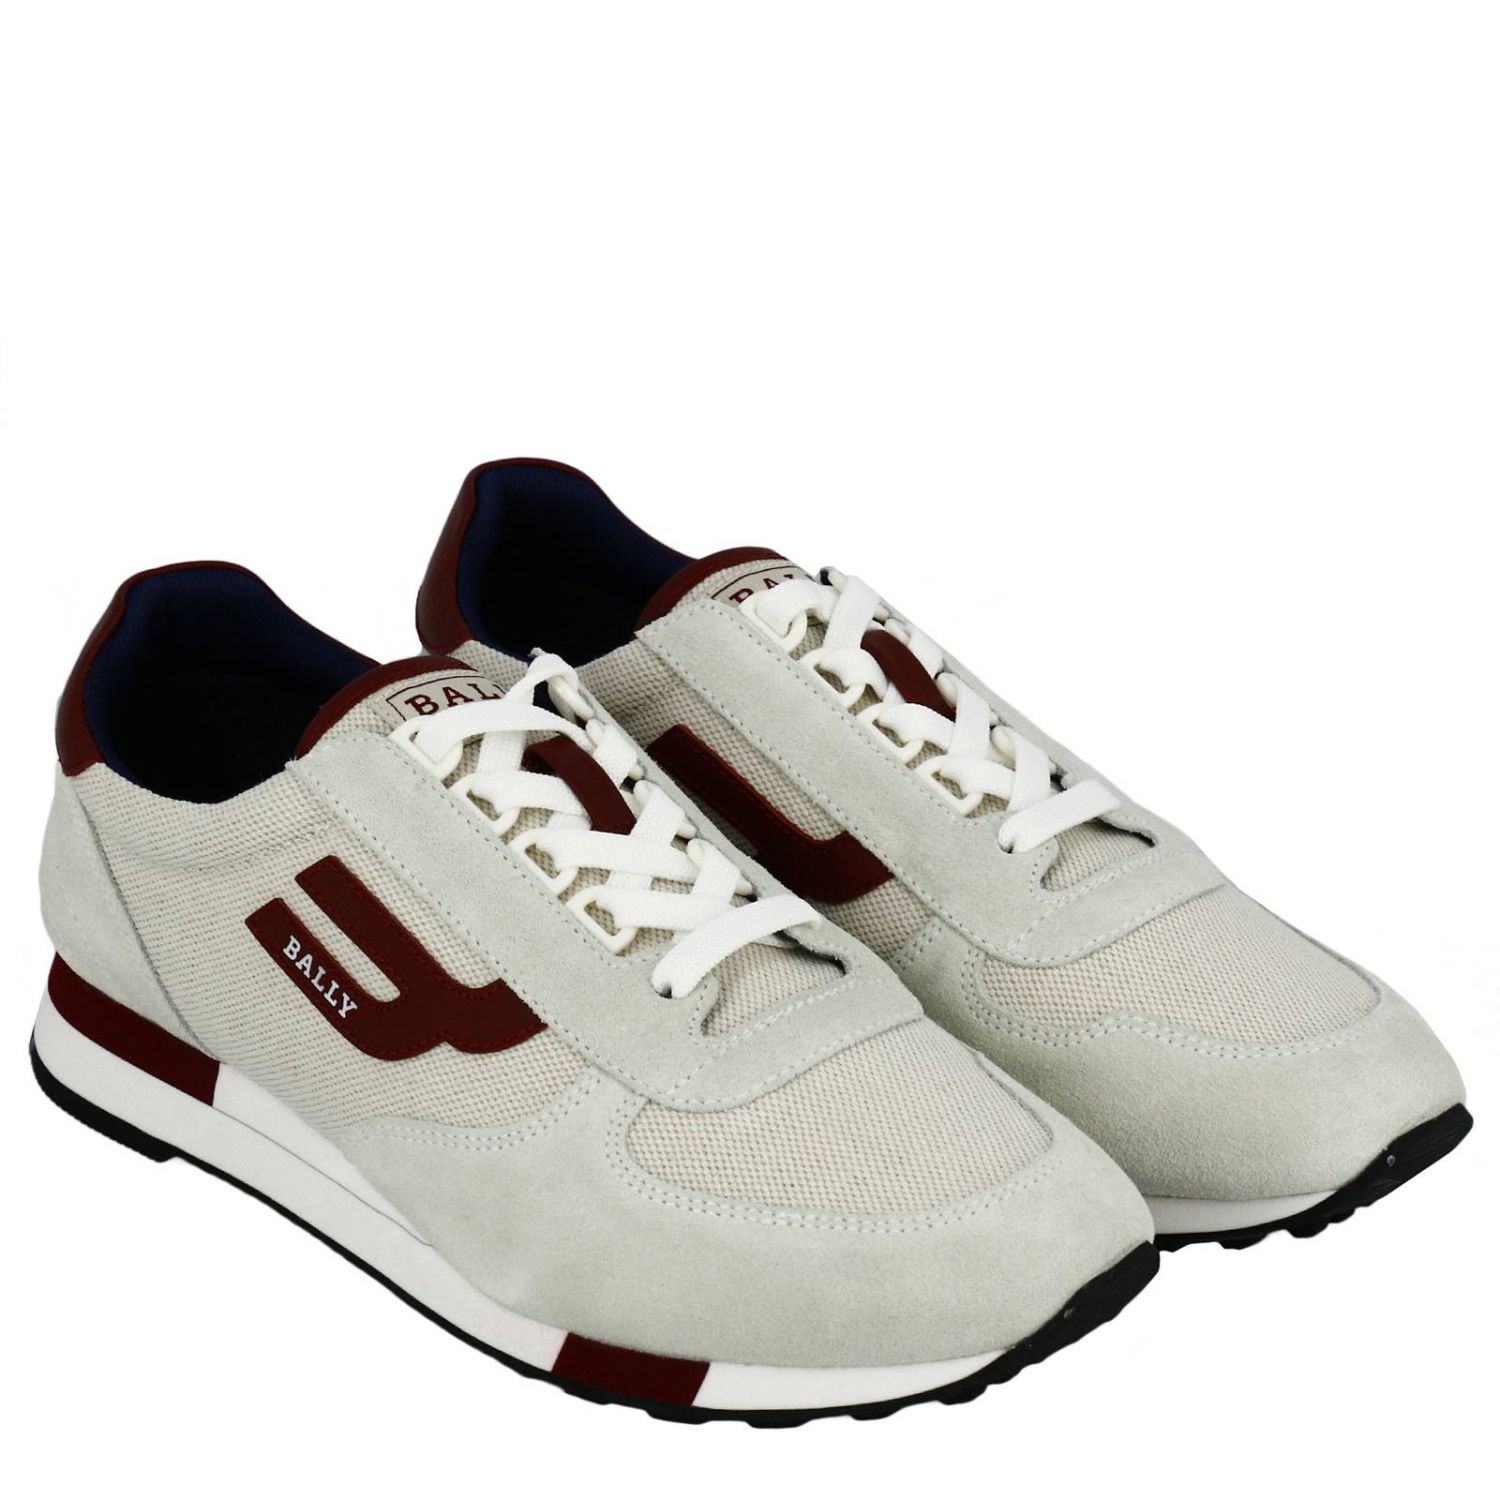 Bally Outlet: Shoes men - White | Sneakers Bally 6221262 GIGLIO.COM